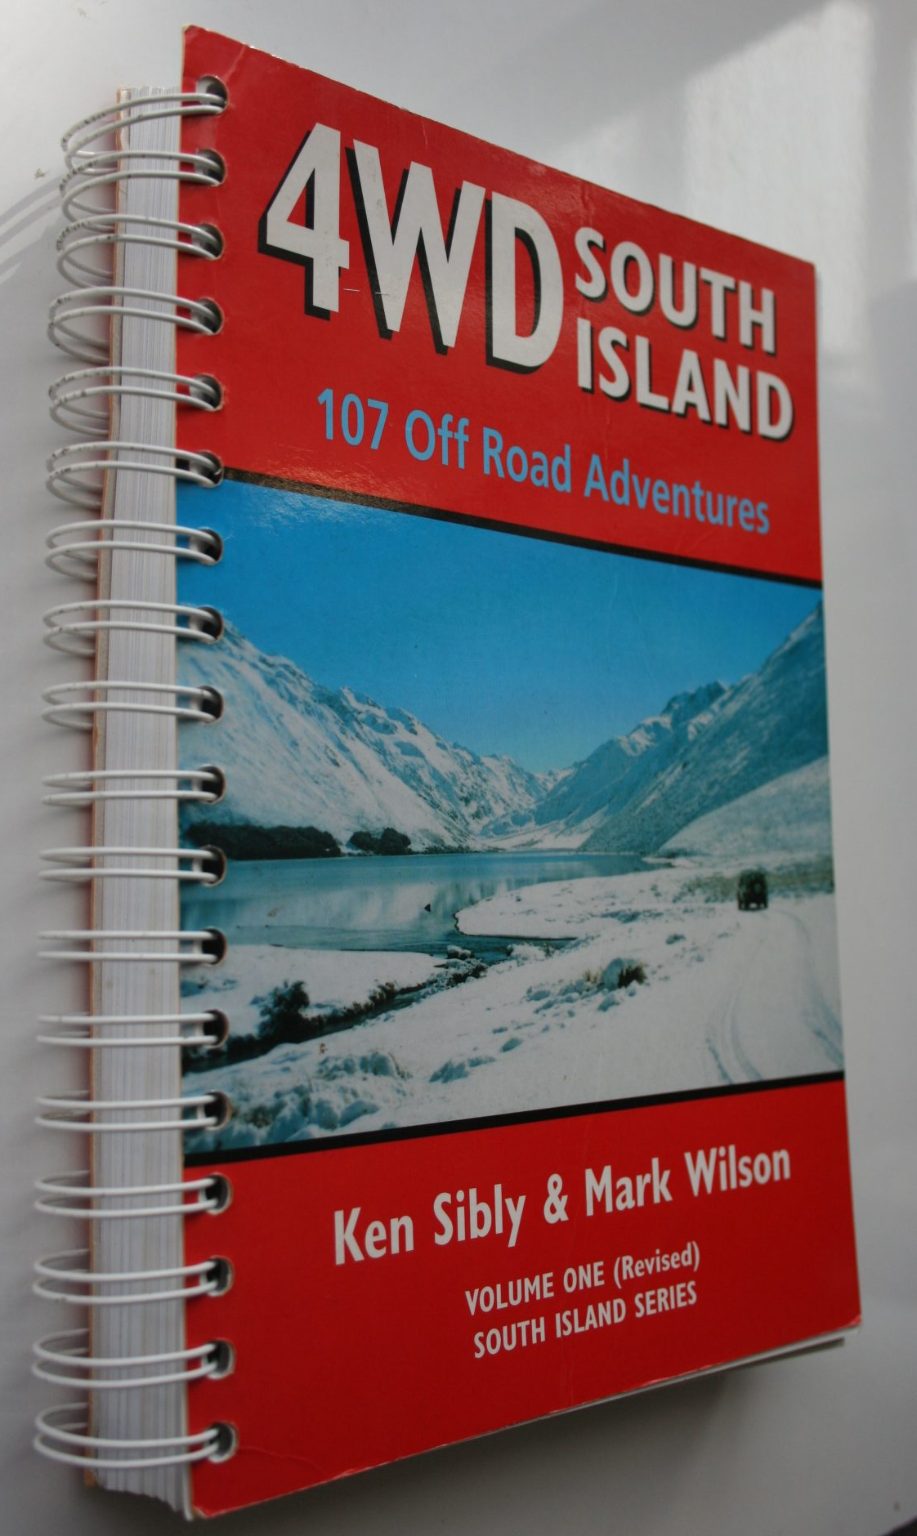 4WD South Island: 107 Off Road Adventures, Volume One (revised).